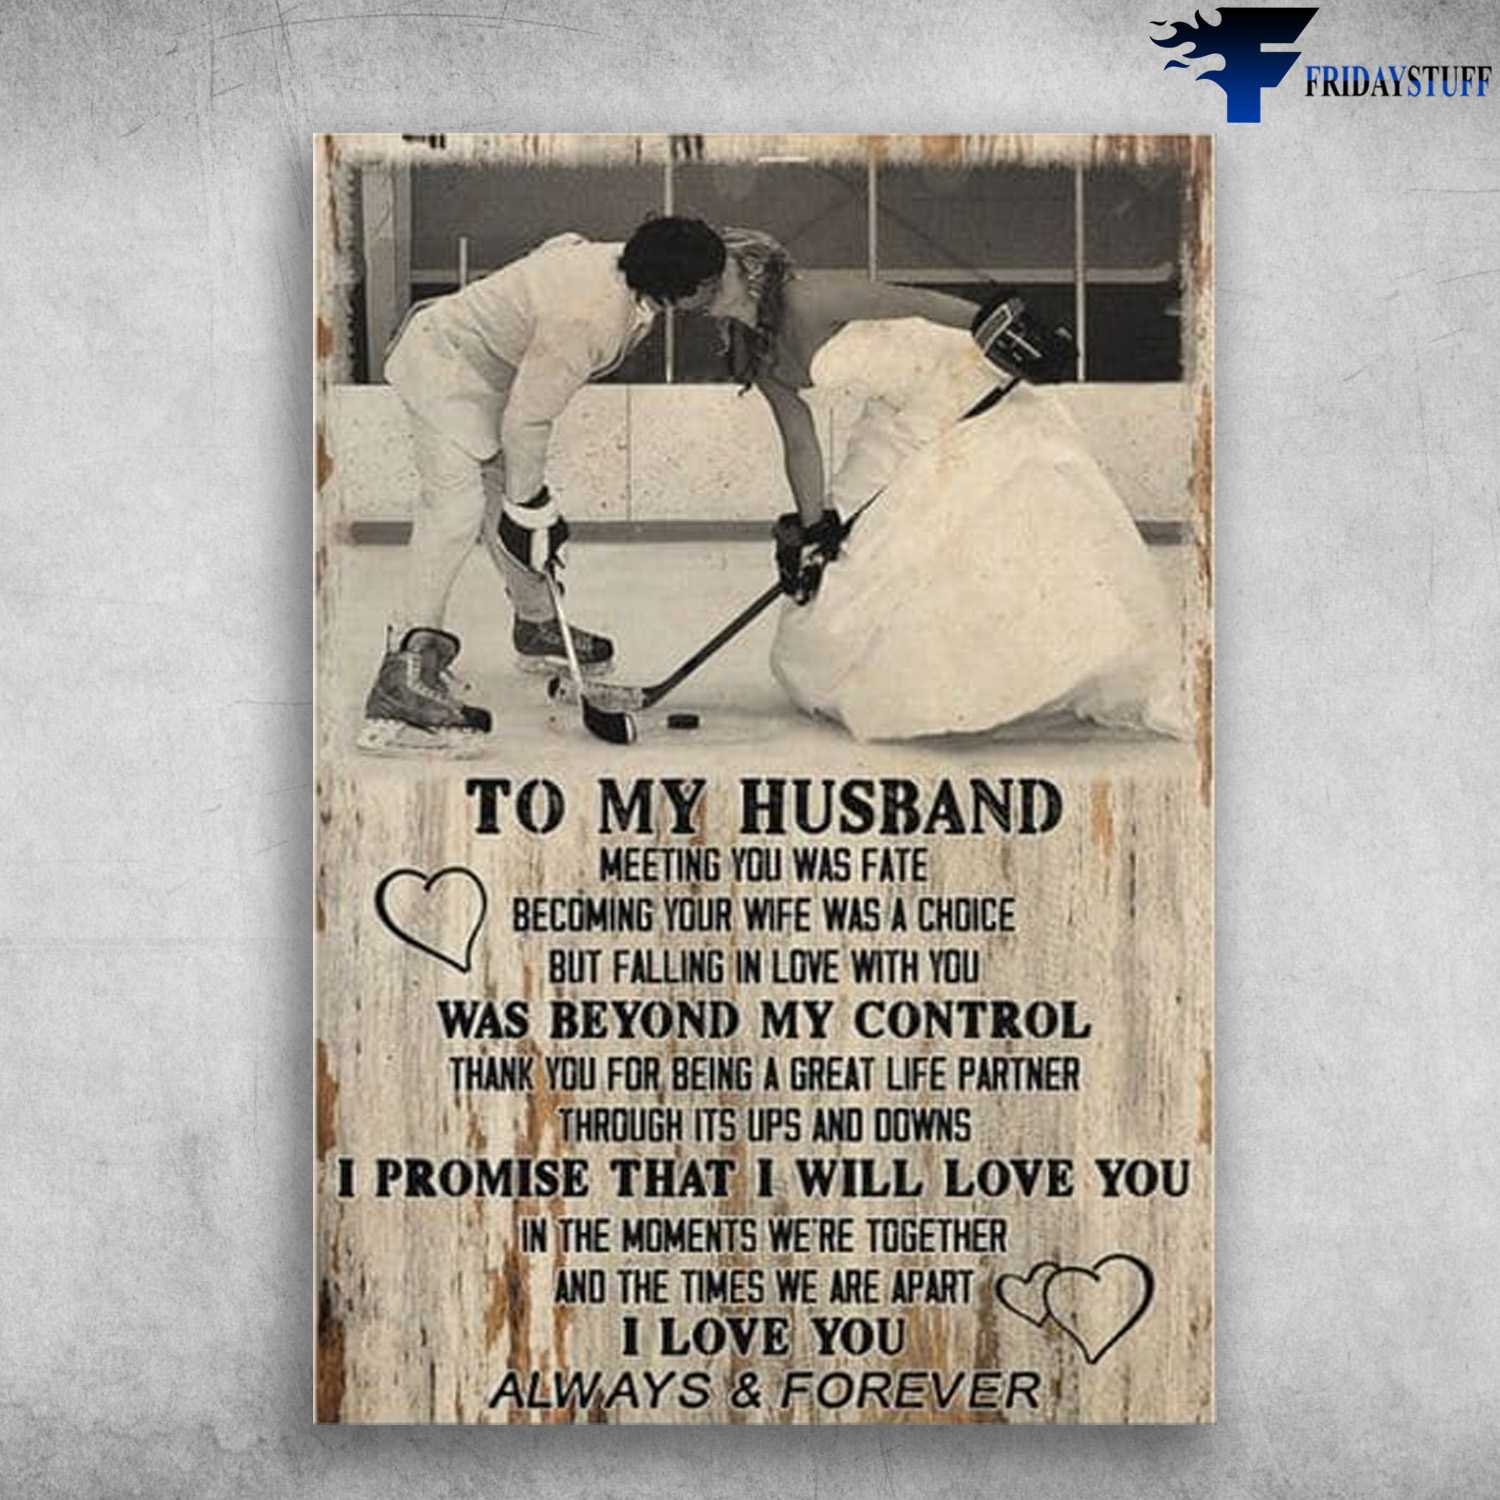 Hockey Poster, Hockey Couple, To My Husband, Meeting You Was Fate, Becoming Your Wife Was A Choice, But Falling In Love With You